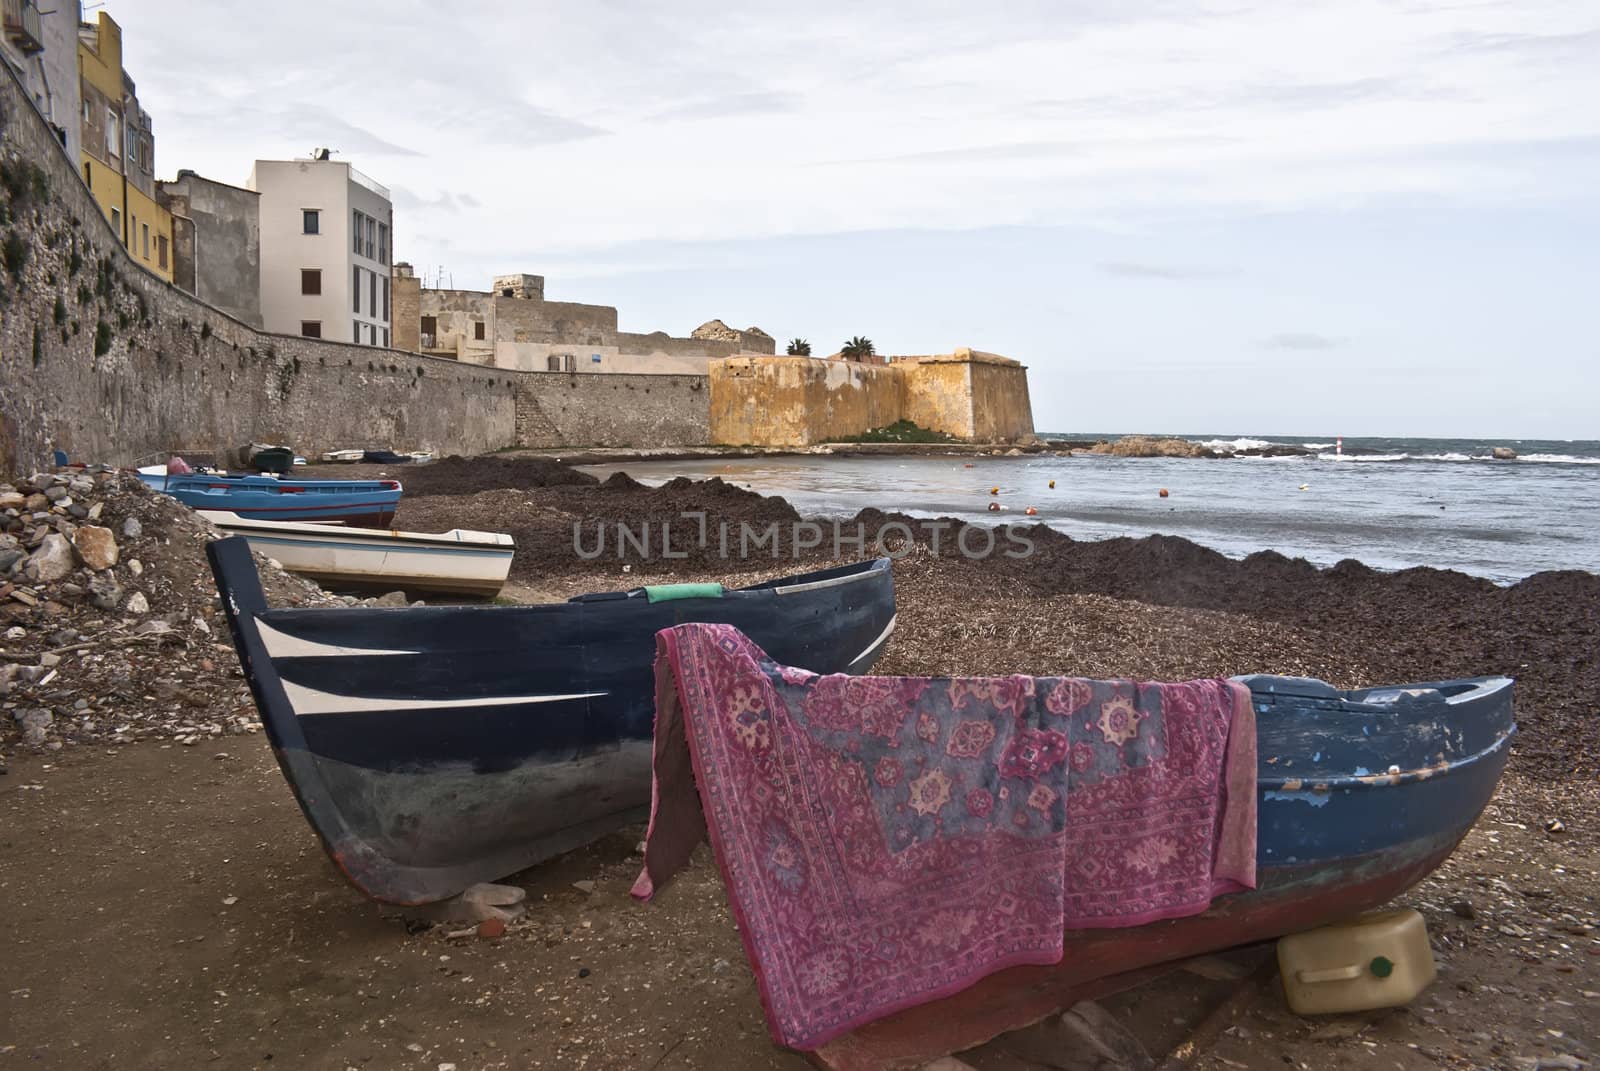 Boats in the marina of trapani with old buildings and sky cloudy